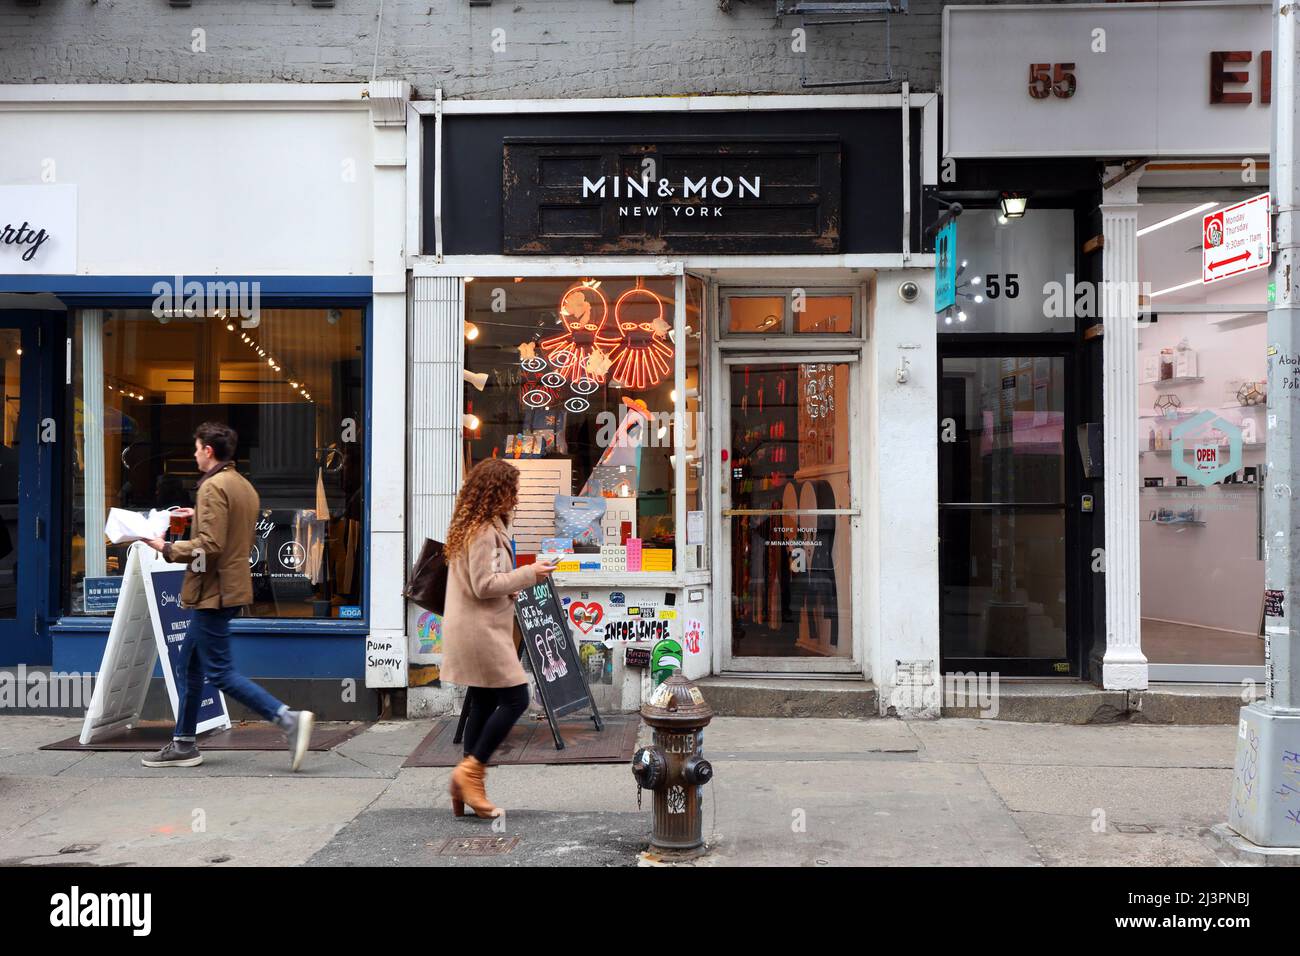 Min & Mon, 55 Spring St, New York, NYC storefront photo of a handbag and fashion boutique in the Nolita neighborhood in Manhattan. Stock Photo